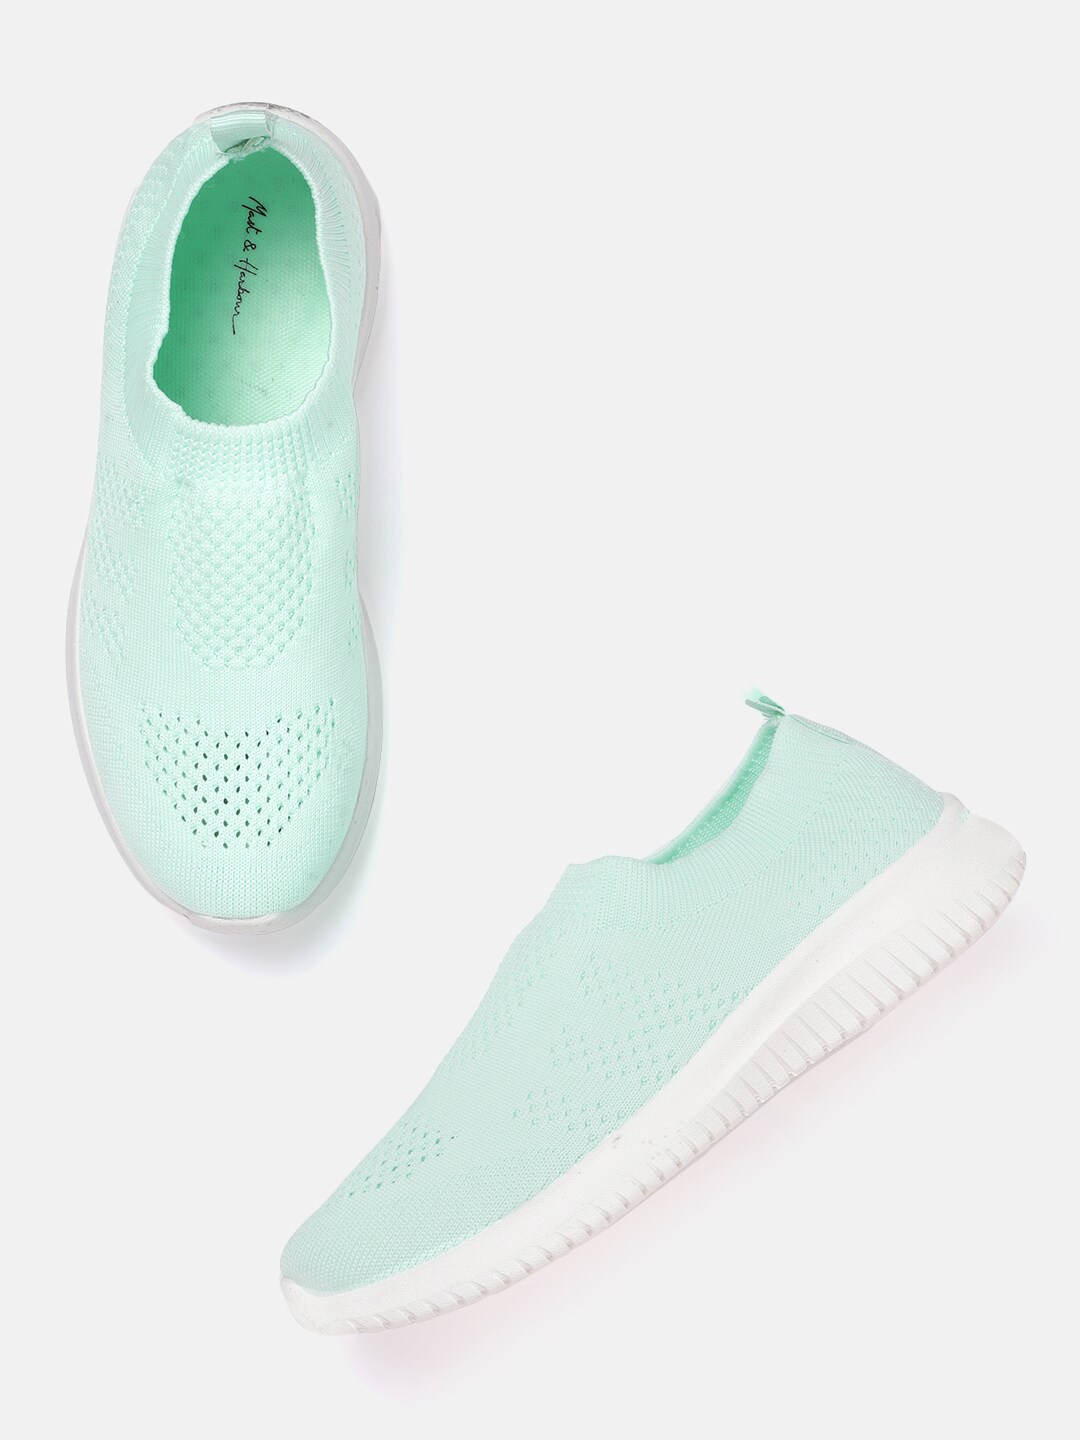 Mast & Harbour Women Mint Green Woven Design Slip-On Sneakers Price in India